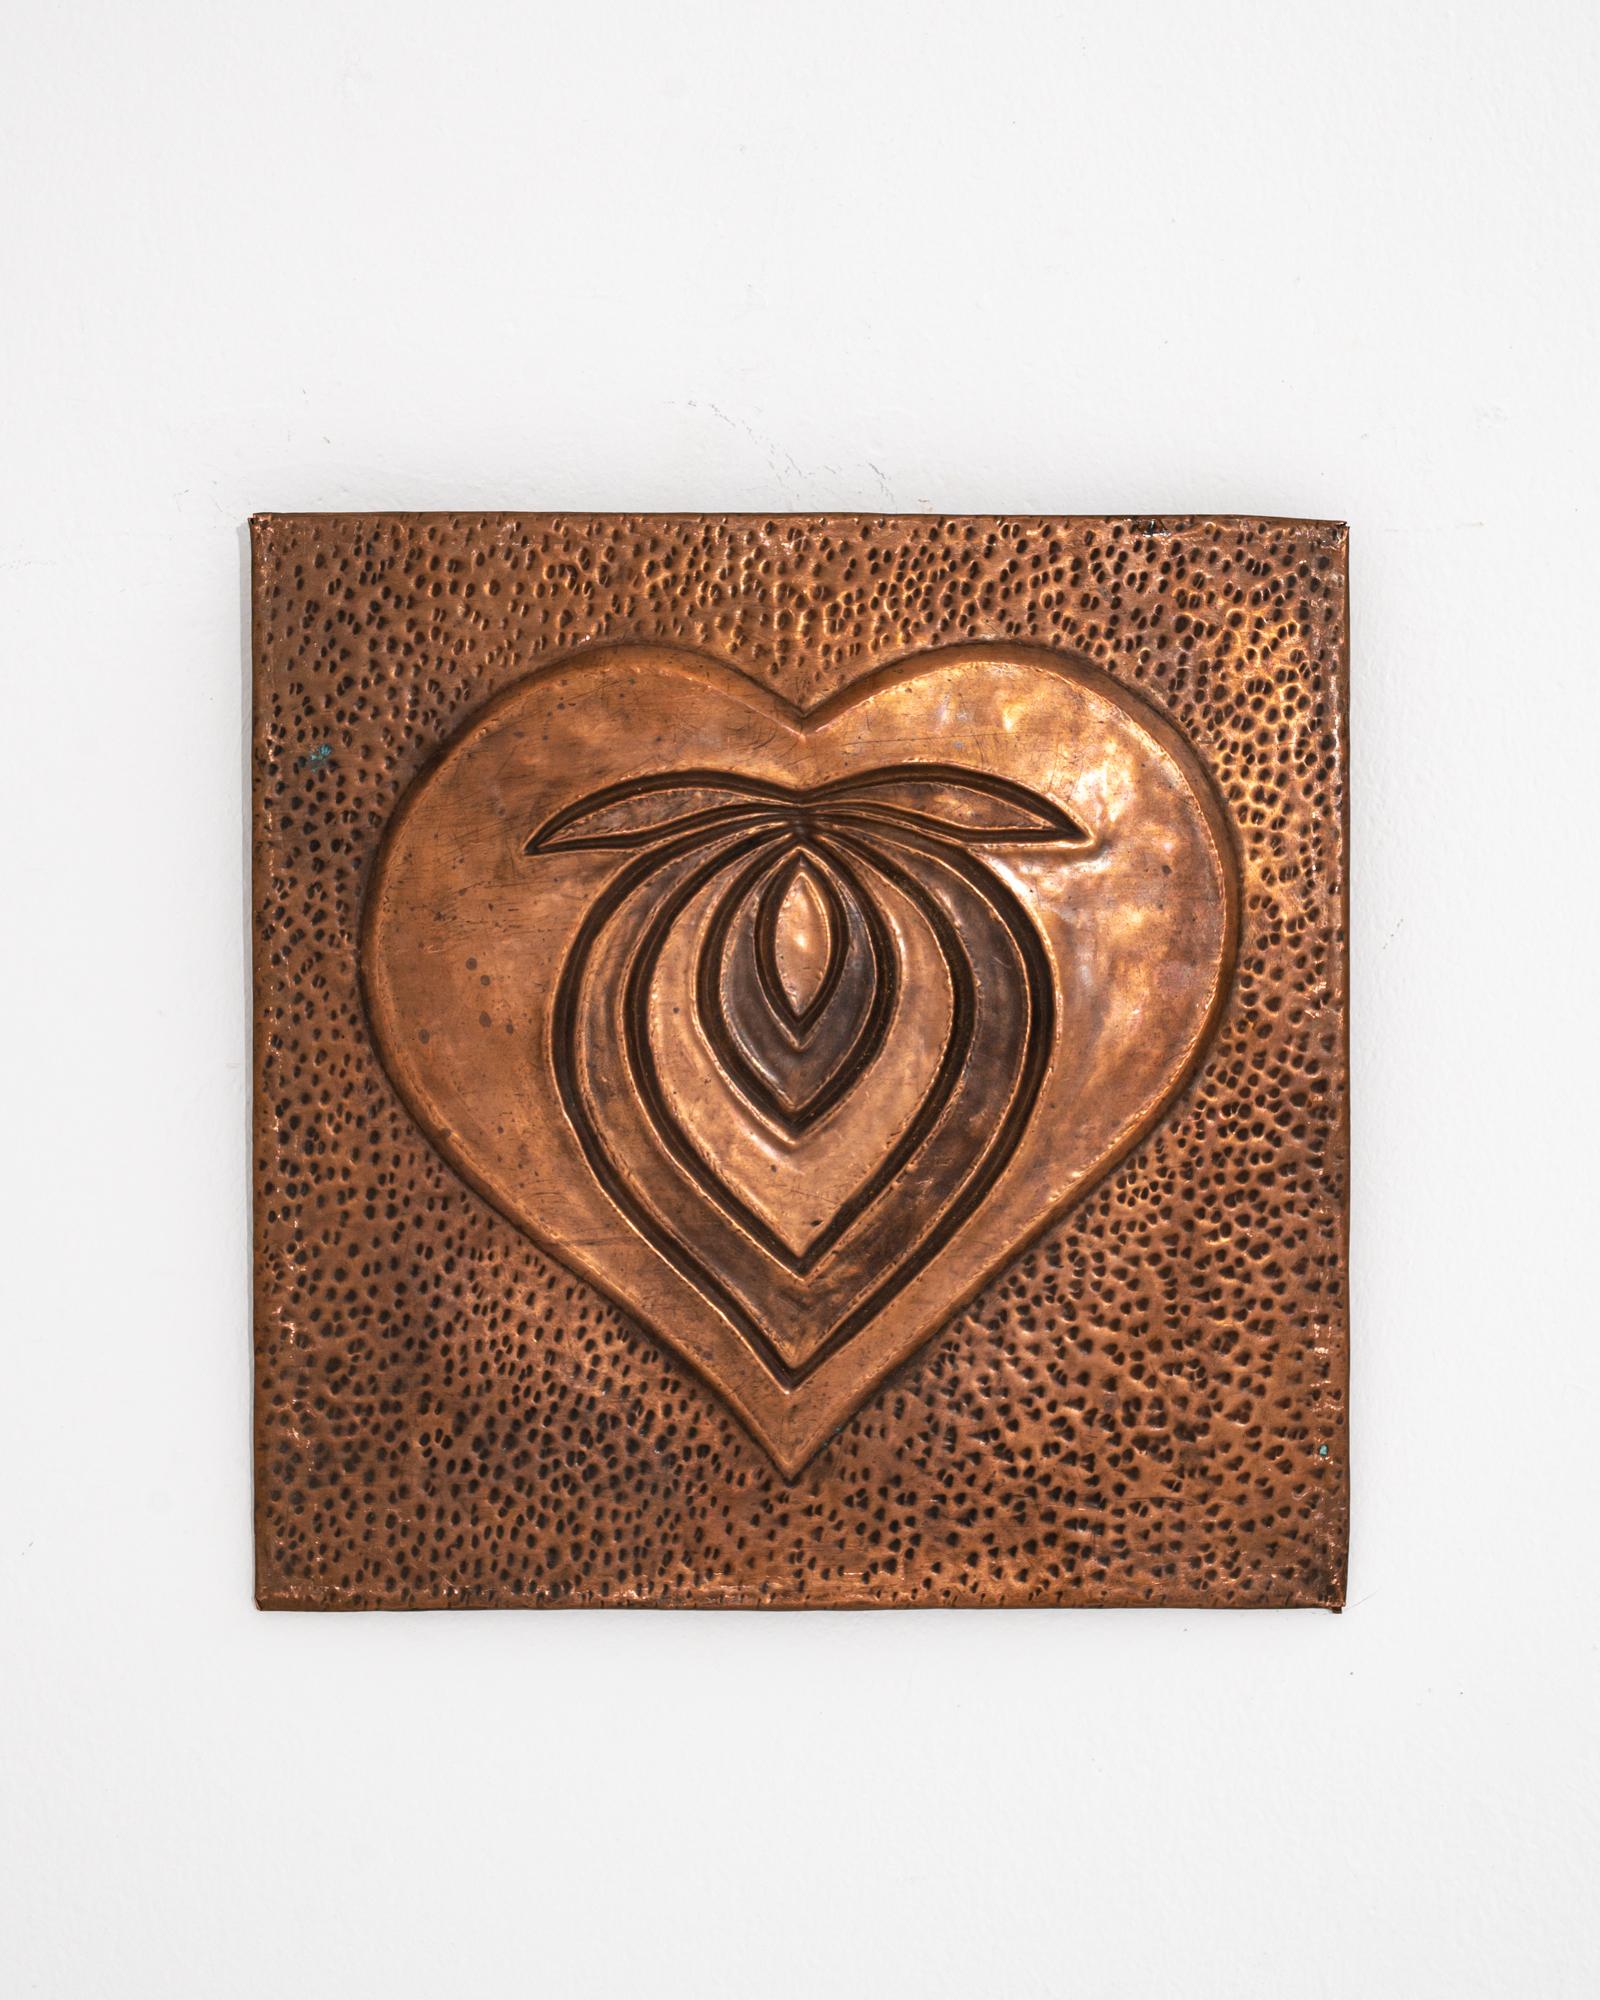 Graphic and eye-catching, this copper wall decoration makes a unique vintage accent. The square plaque is decorated with a raised metal symbol —abstract and typographic, the form resembles a stylized heart. The background is composed of marks made